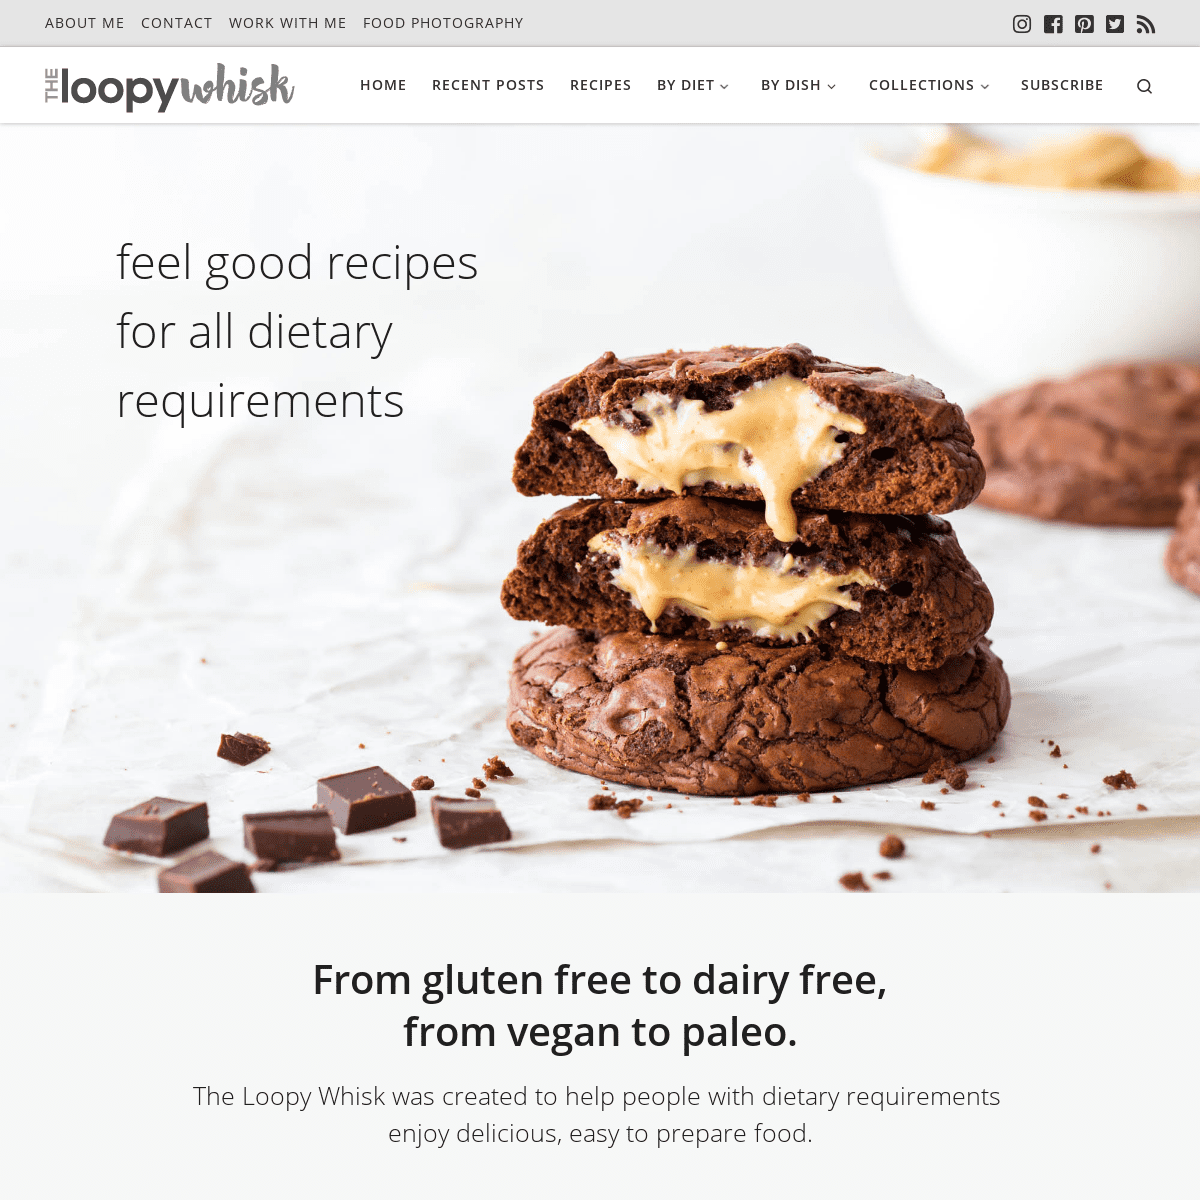 The Loopy Whisk - Feel good recipes for all dietary requirements.